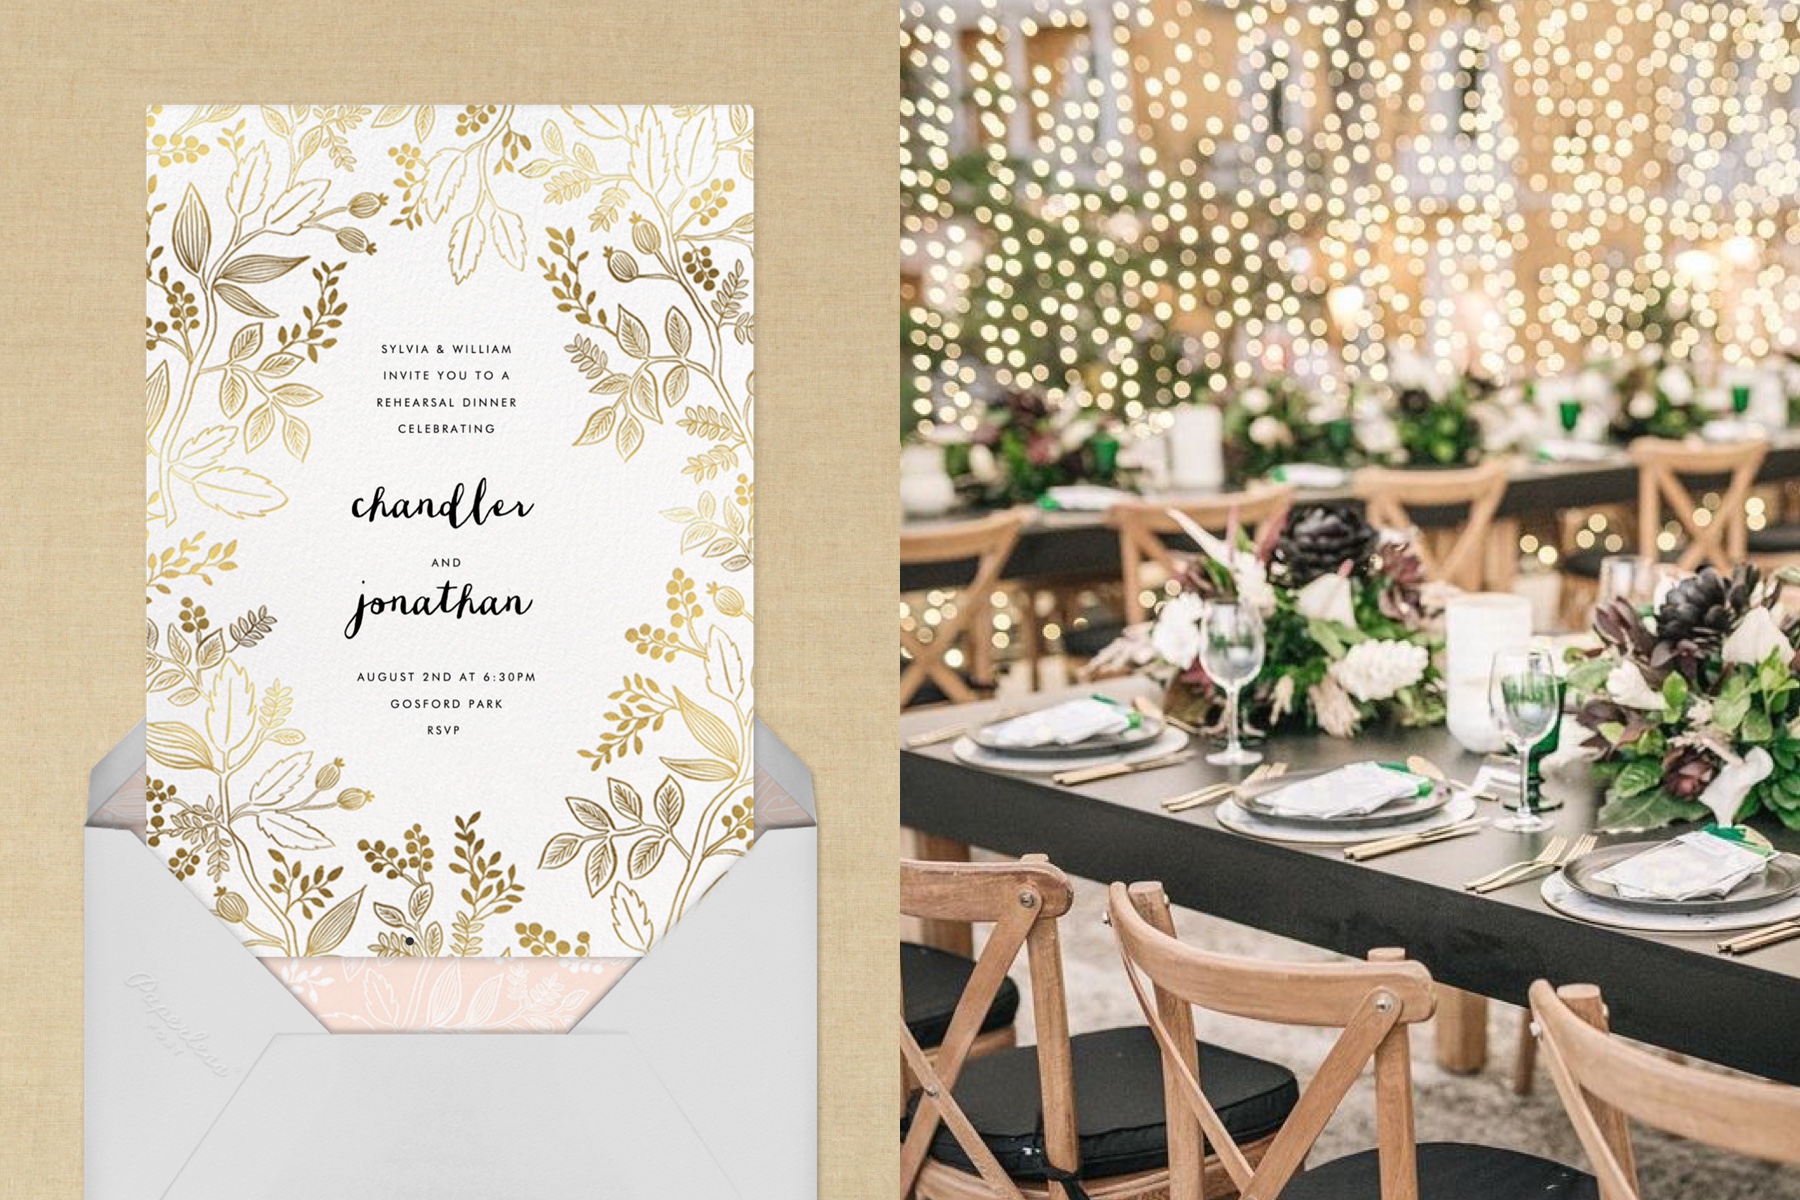 Left: “Queen Anne” by Rifle Paper Co for Paperless Post | Right: Event design by Matthew Robbins Design, image courtesy Matthew Robbins Design.